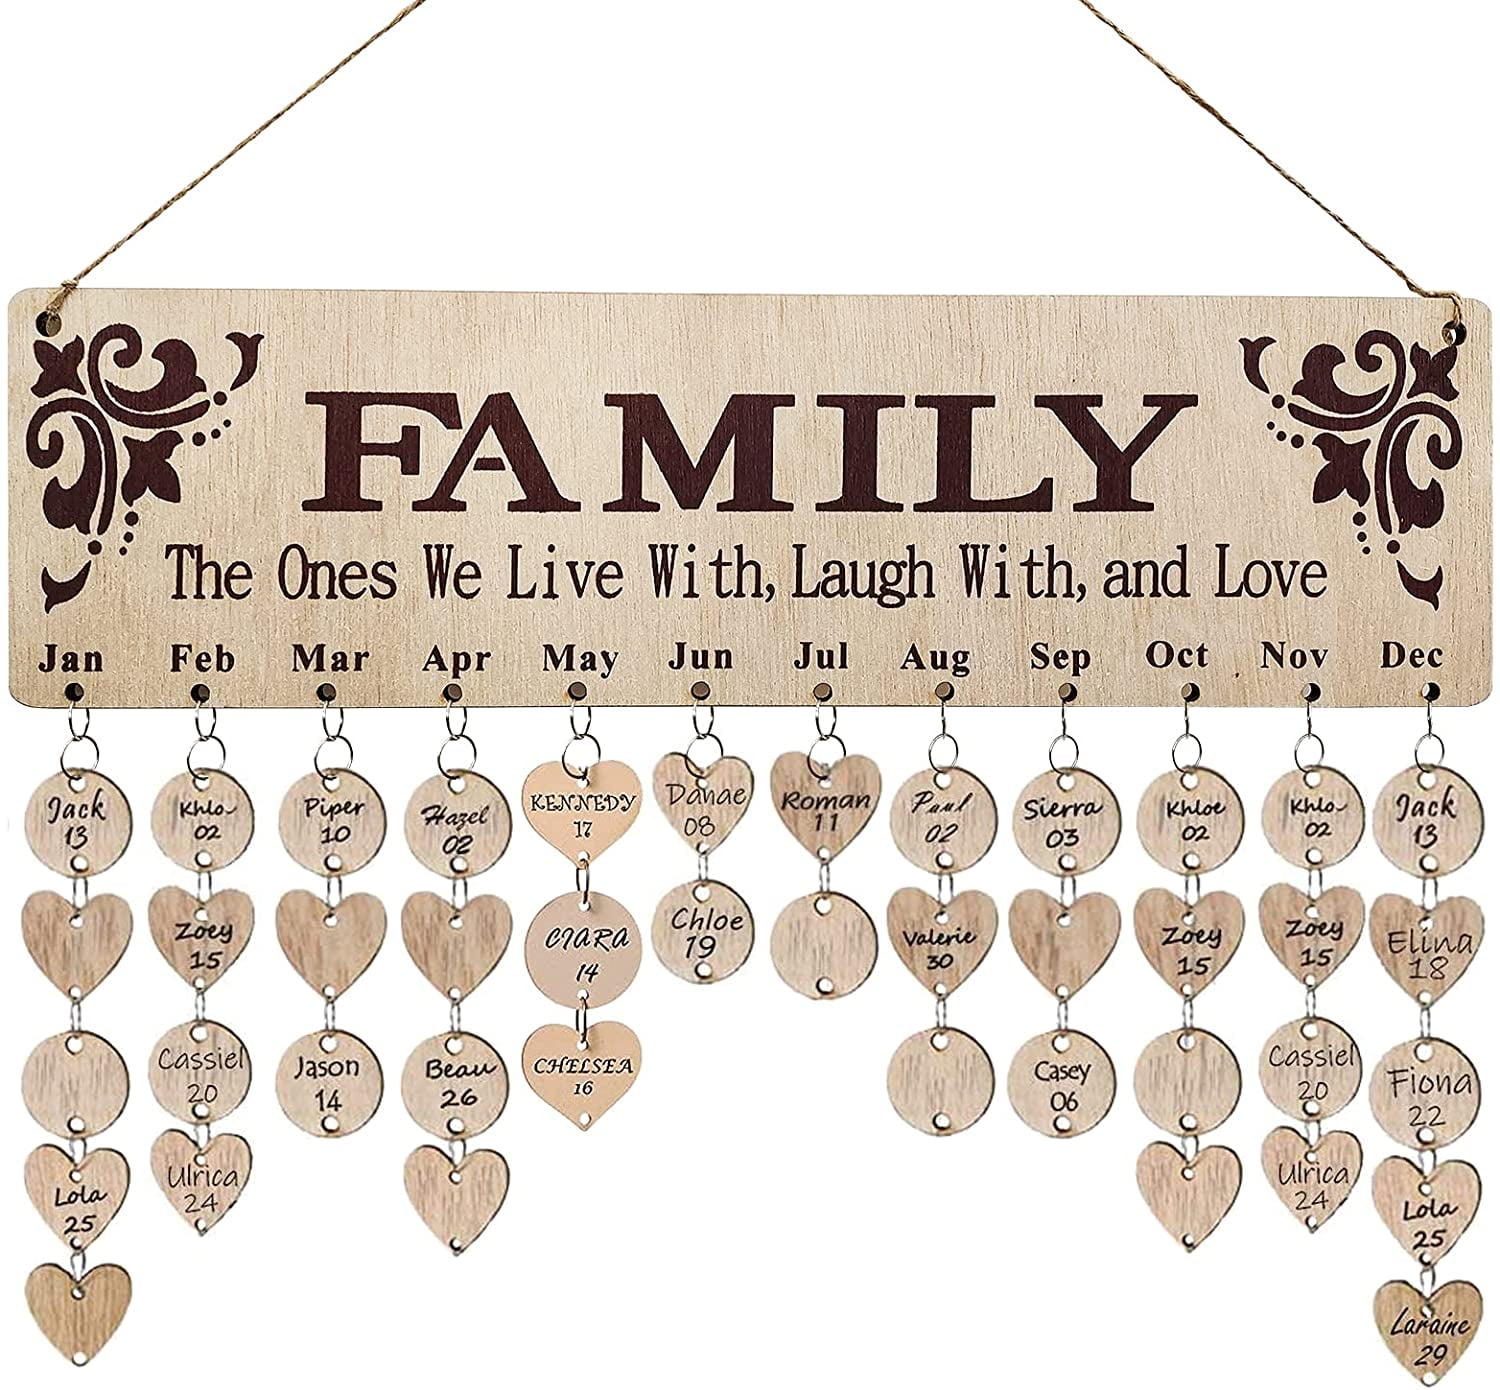 Gifts for Mom's Family Birthday Board Wooden Birthday Calendar Wall Signs A wonderful way to record family members' birthdays - Walmart.com